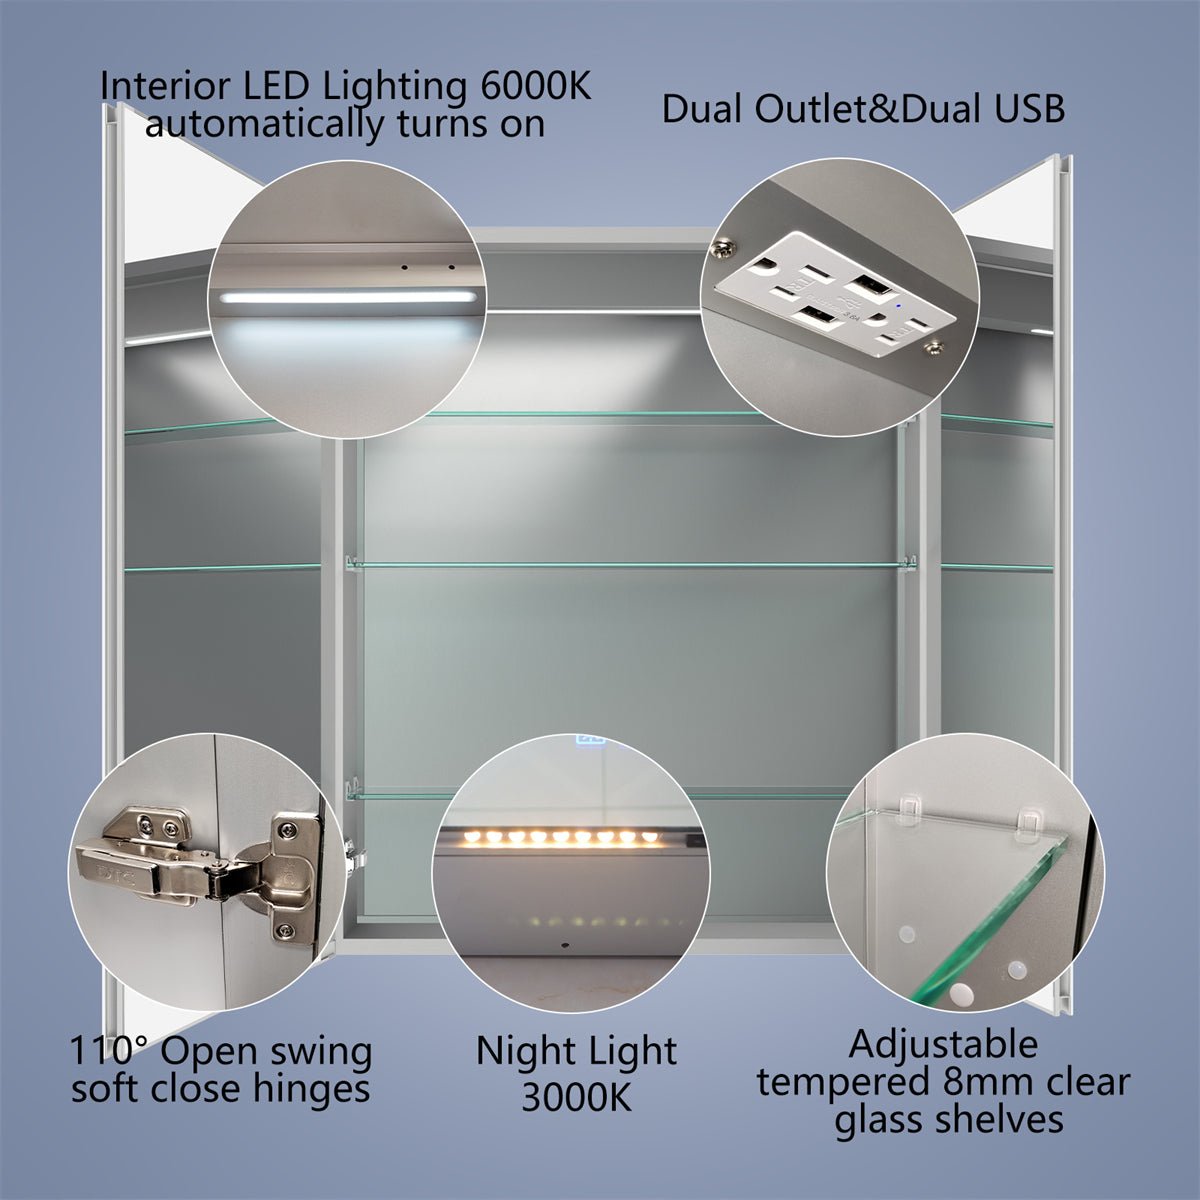 Boost-M2 30" W x 36" H Bathroom Light Medicine Cabinets Recessed or Surface Defogger, Dimmer, Clock，Outlets & USB - ExBriteUSA